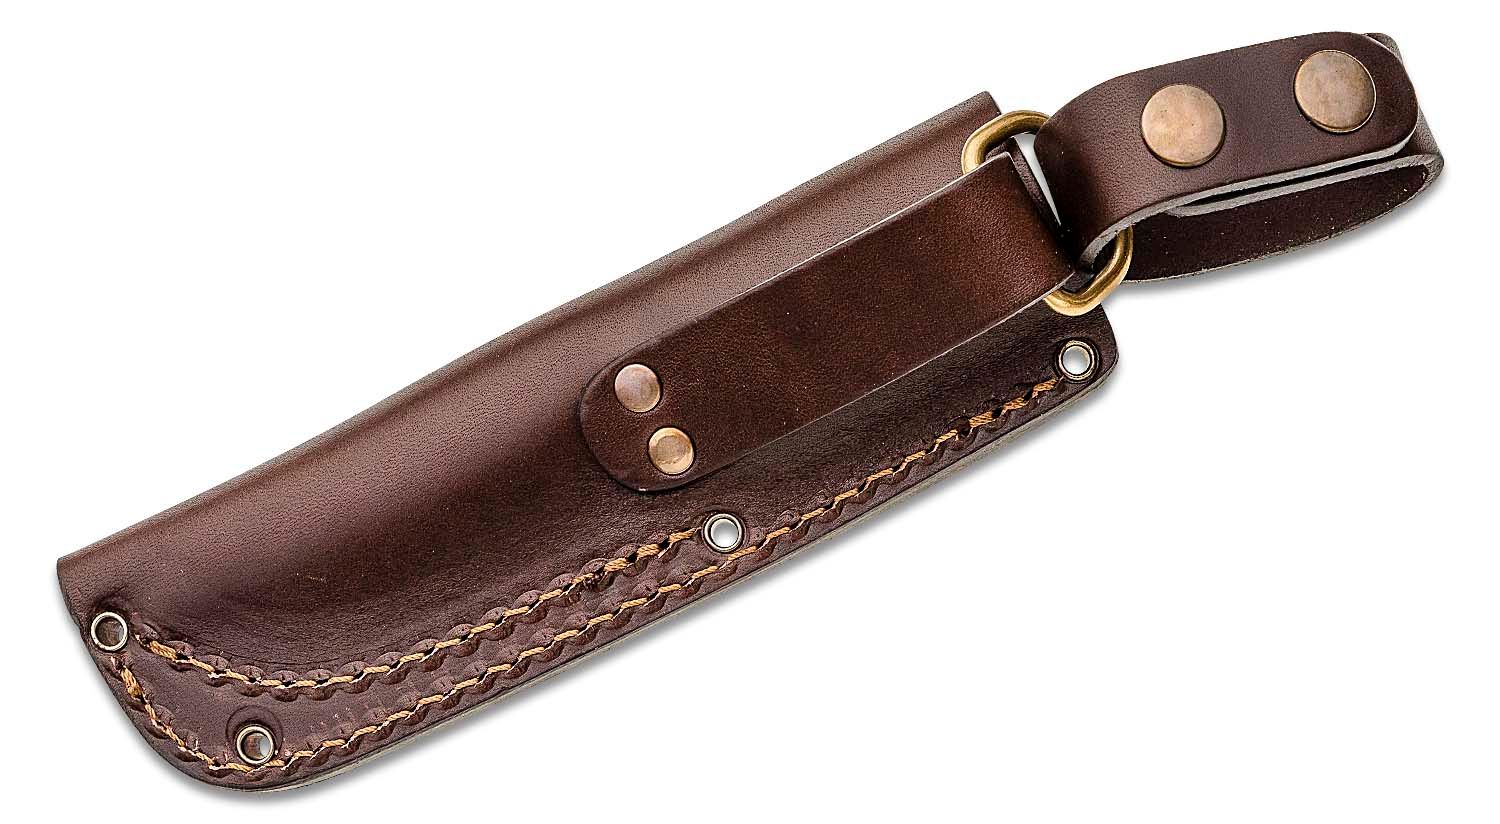 Victorinox 7.0898.20 Knife Sheath Accepts 8 Blade Brown Leather